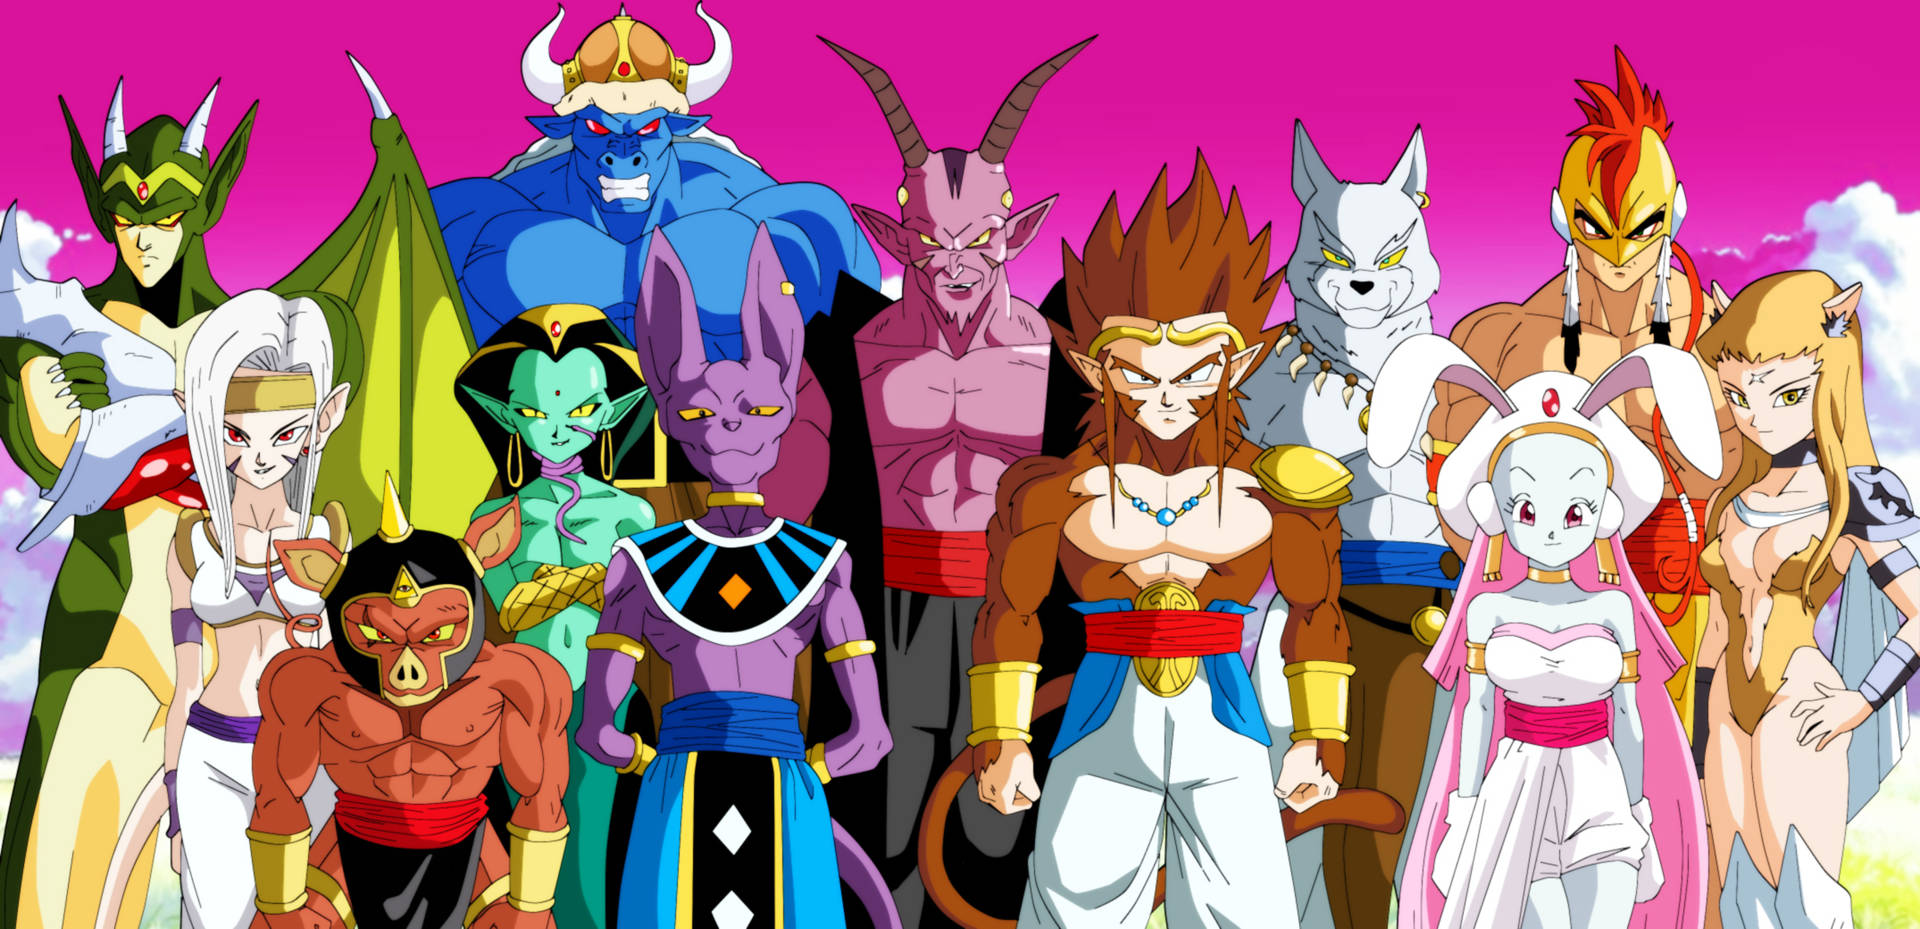 Beerus With Dragon Ball Z Characters Wallpaper